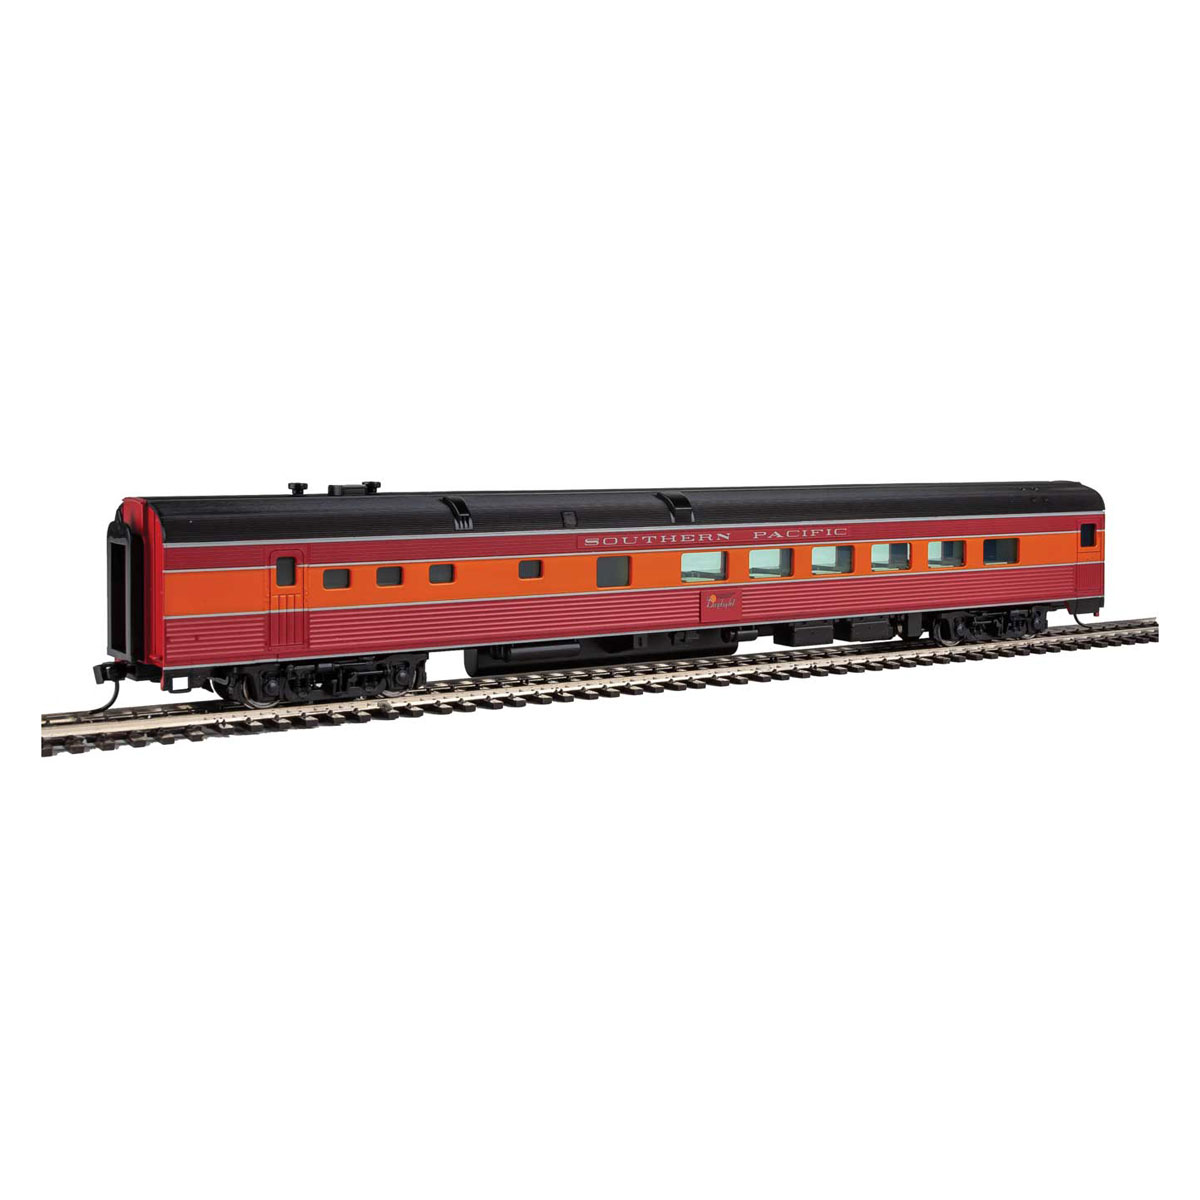 Daylight 1-40276 N Smooth Side Passenger Diner Car Southern Pacific 